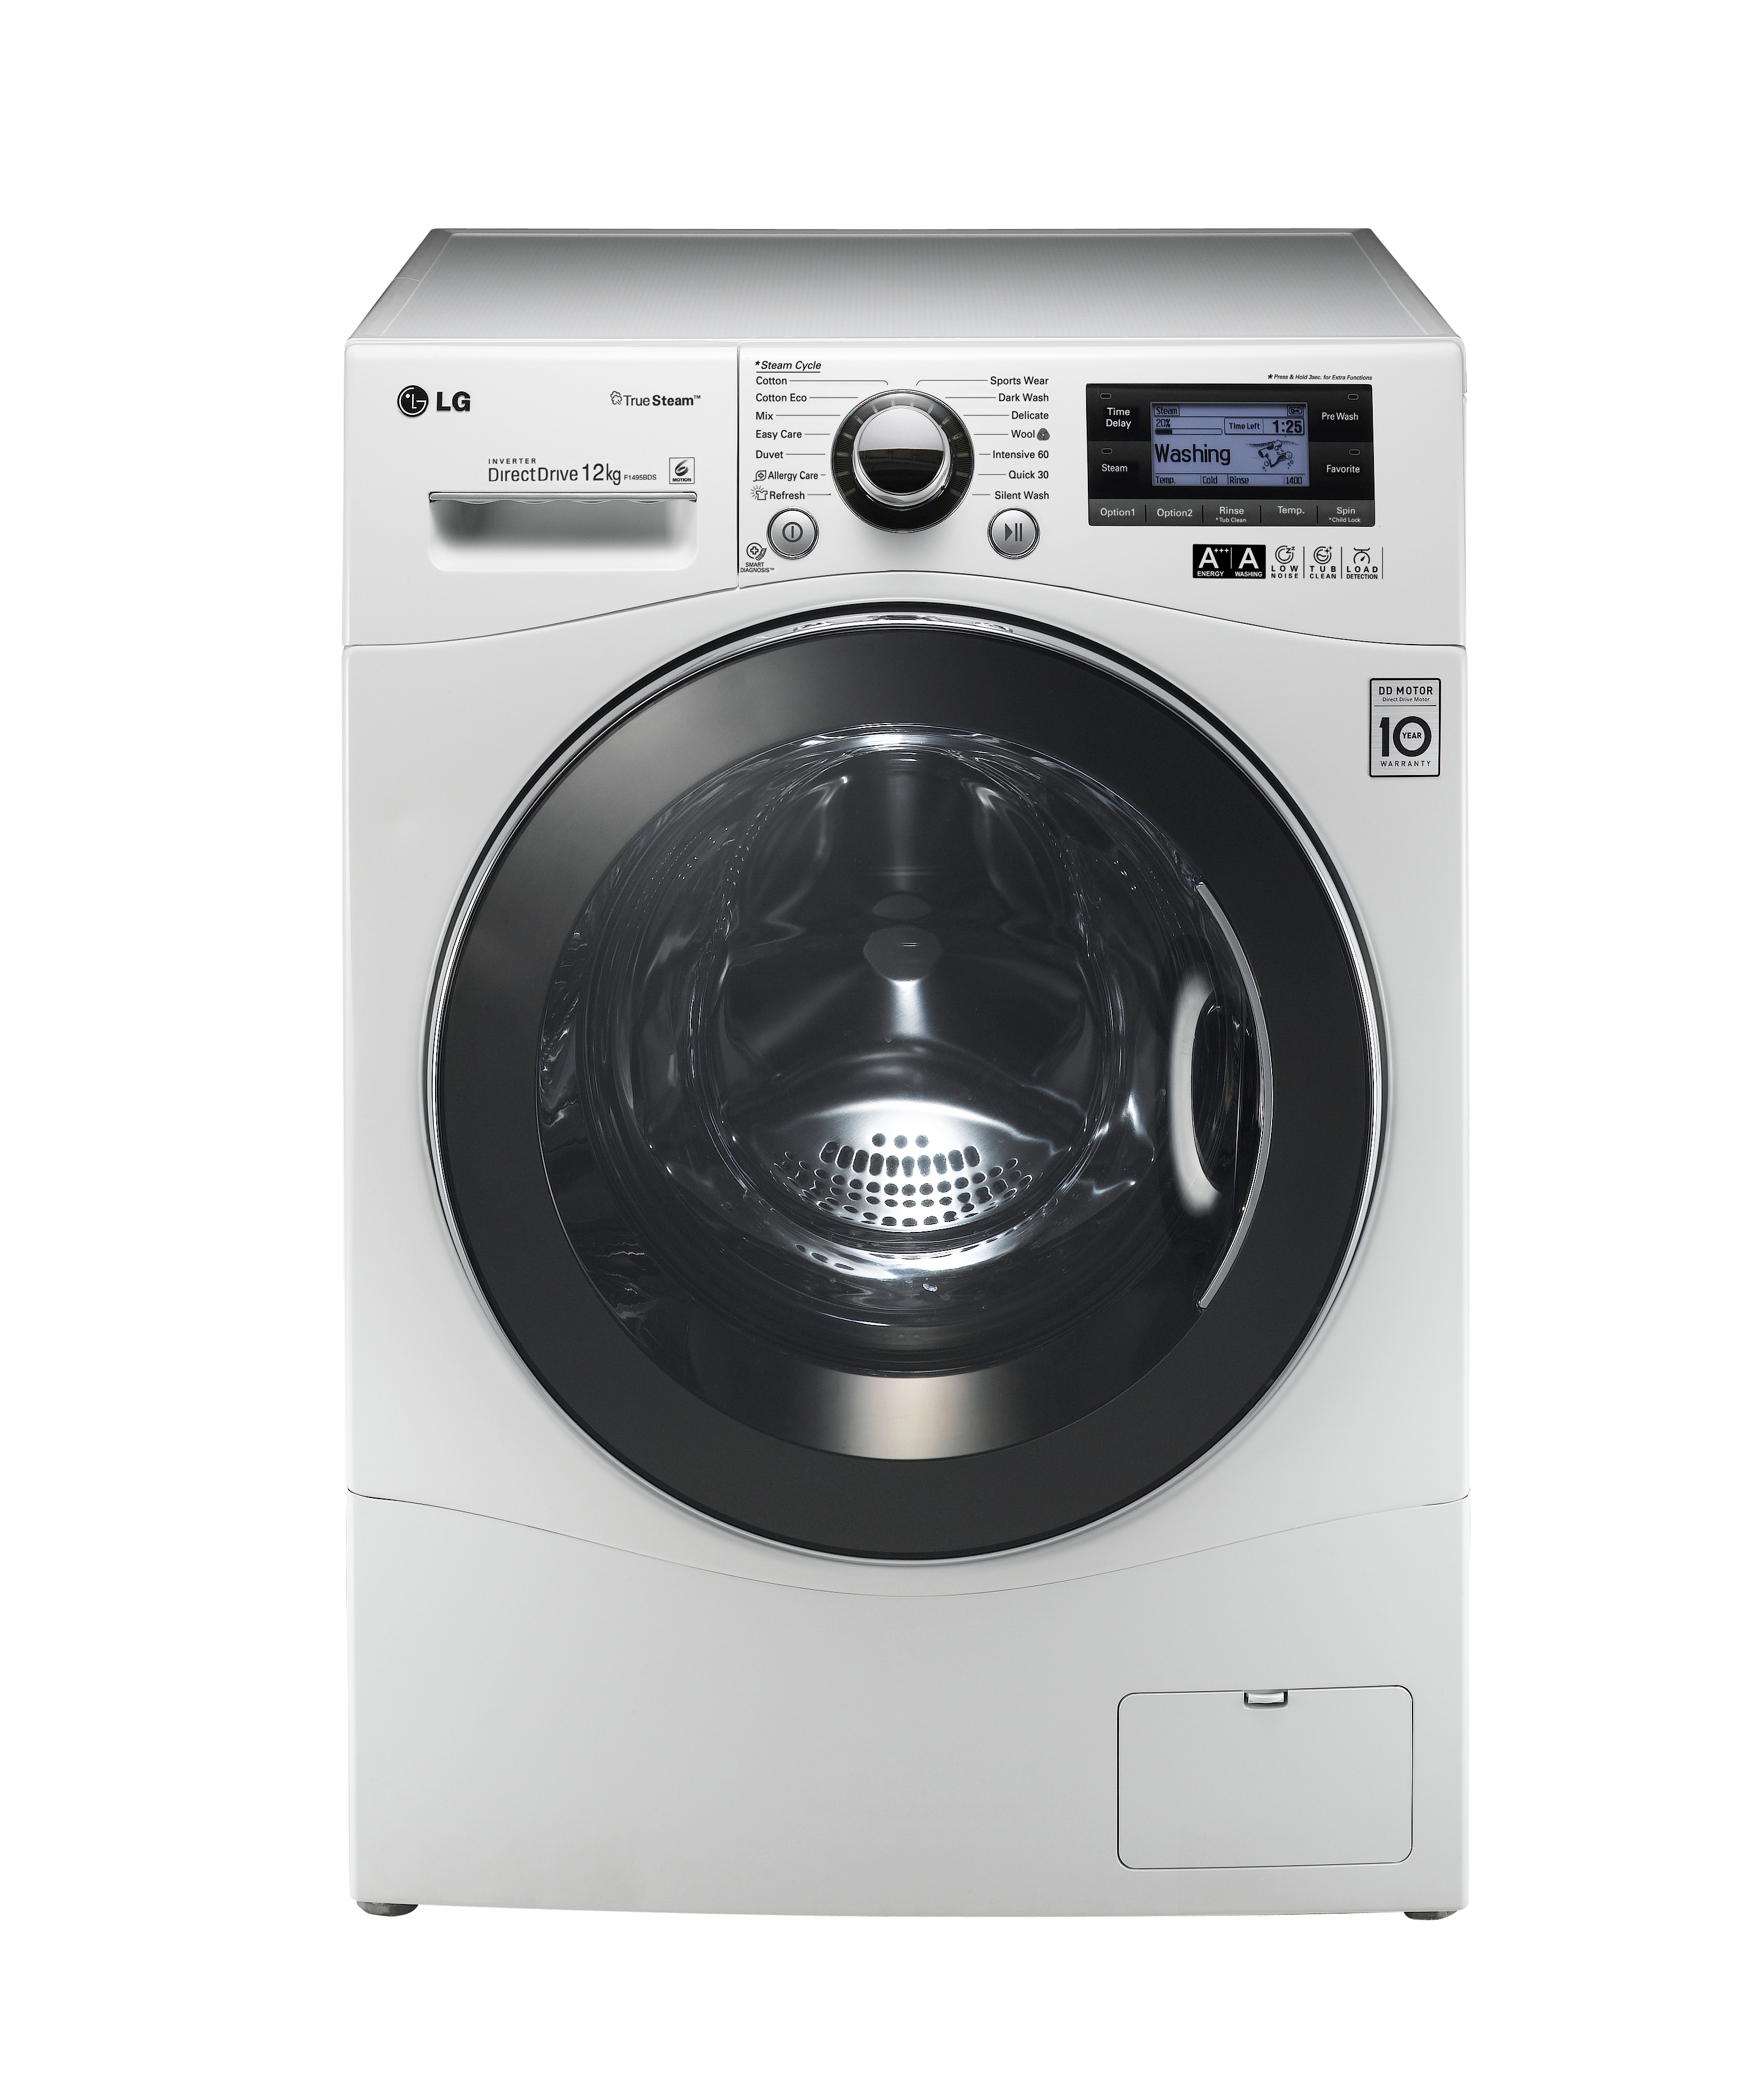 Another view of LG’s 12kg front-load washing machine